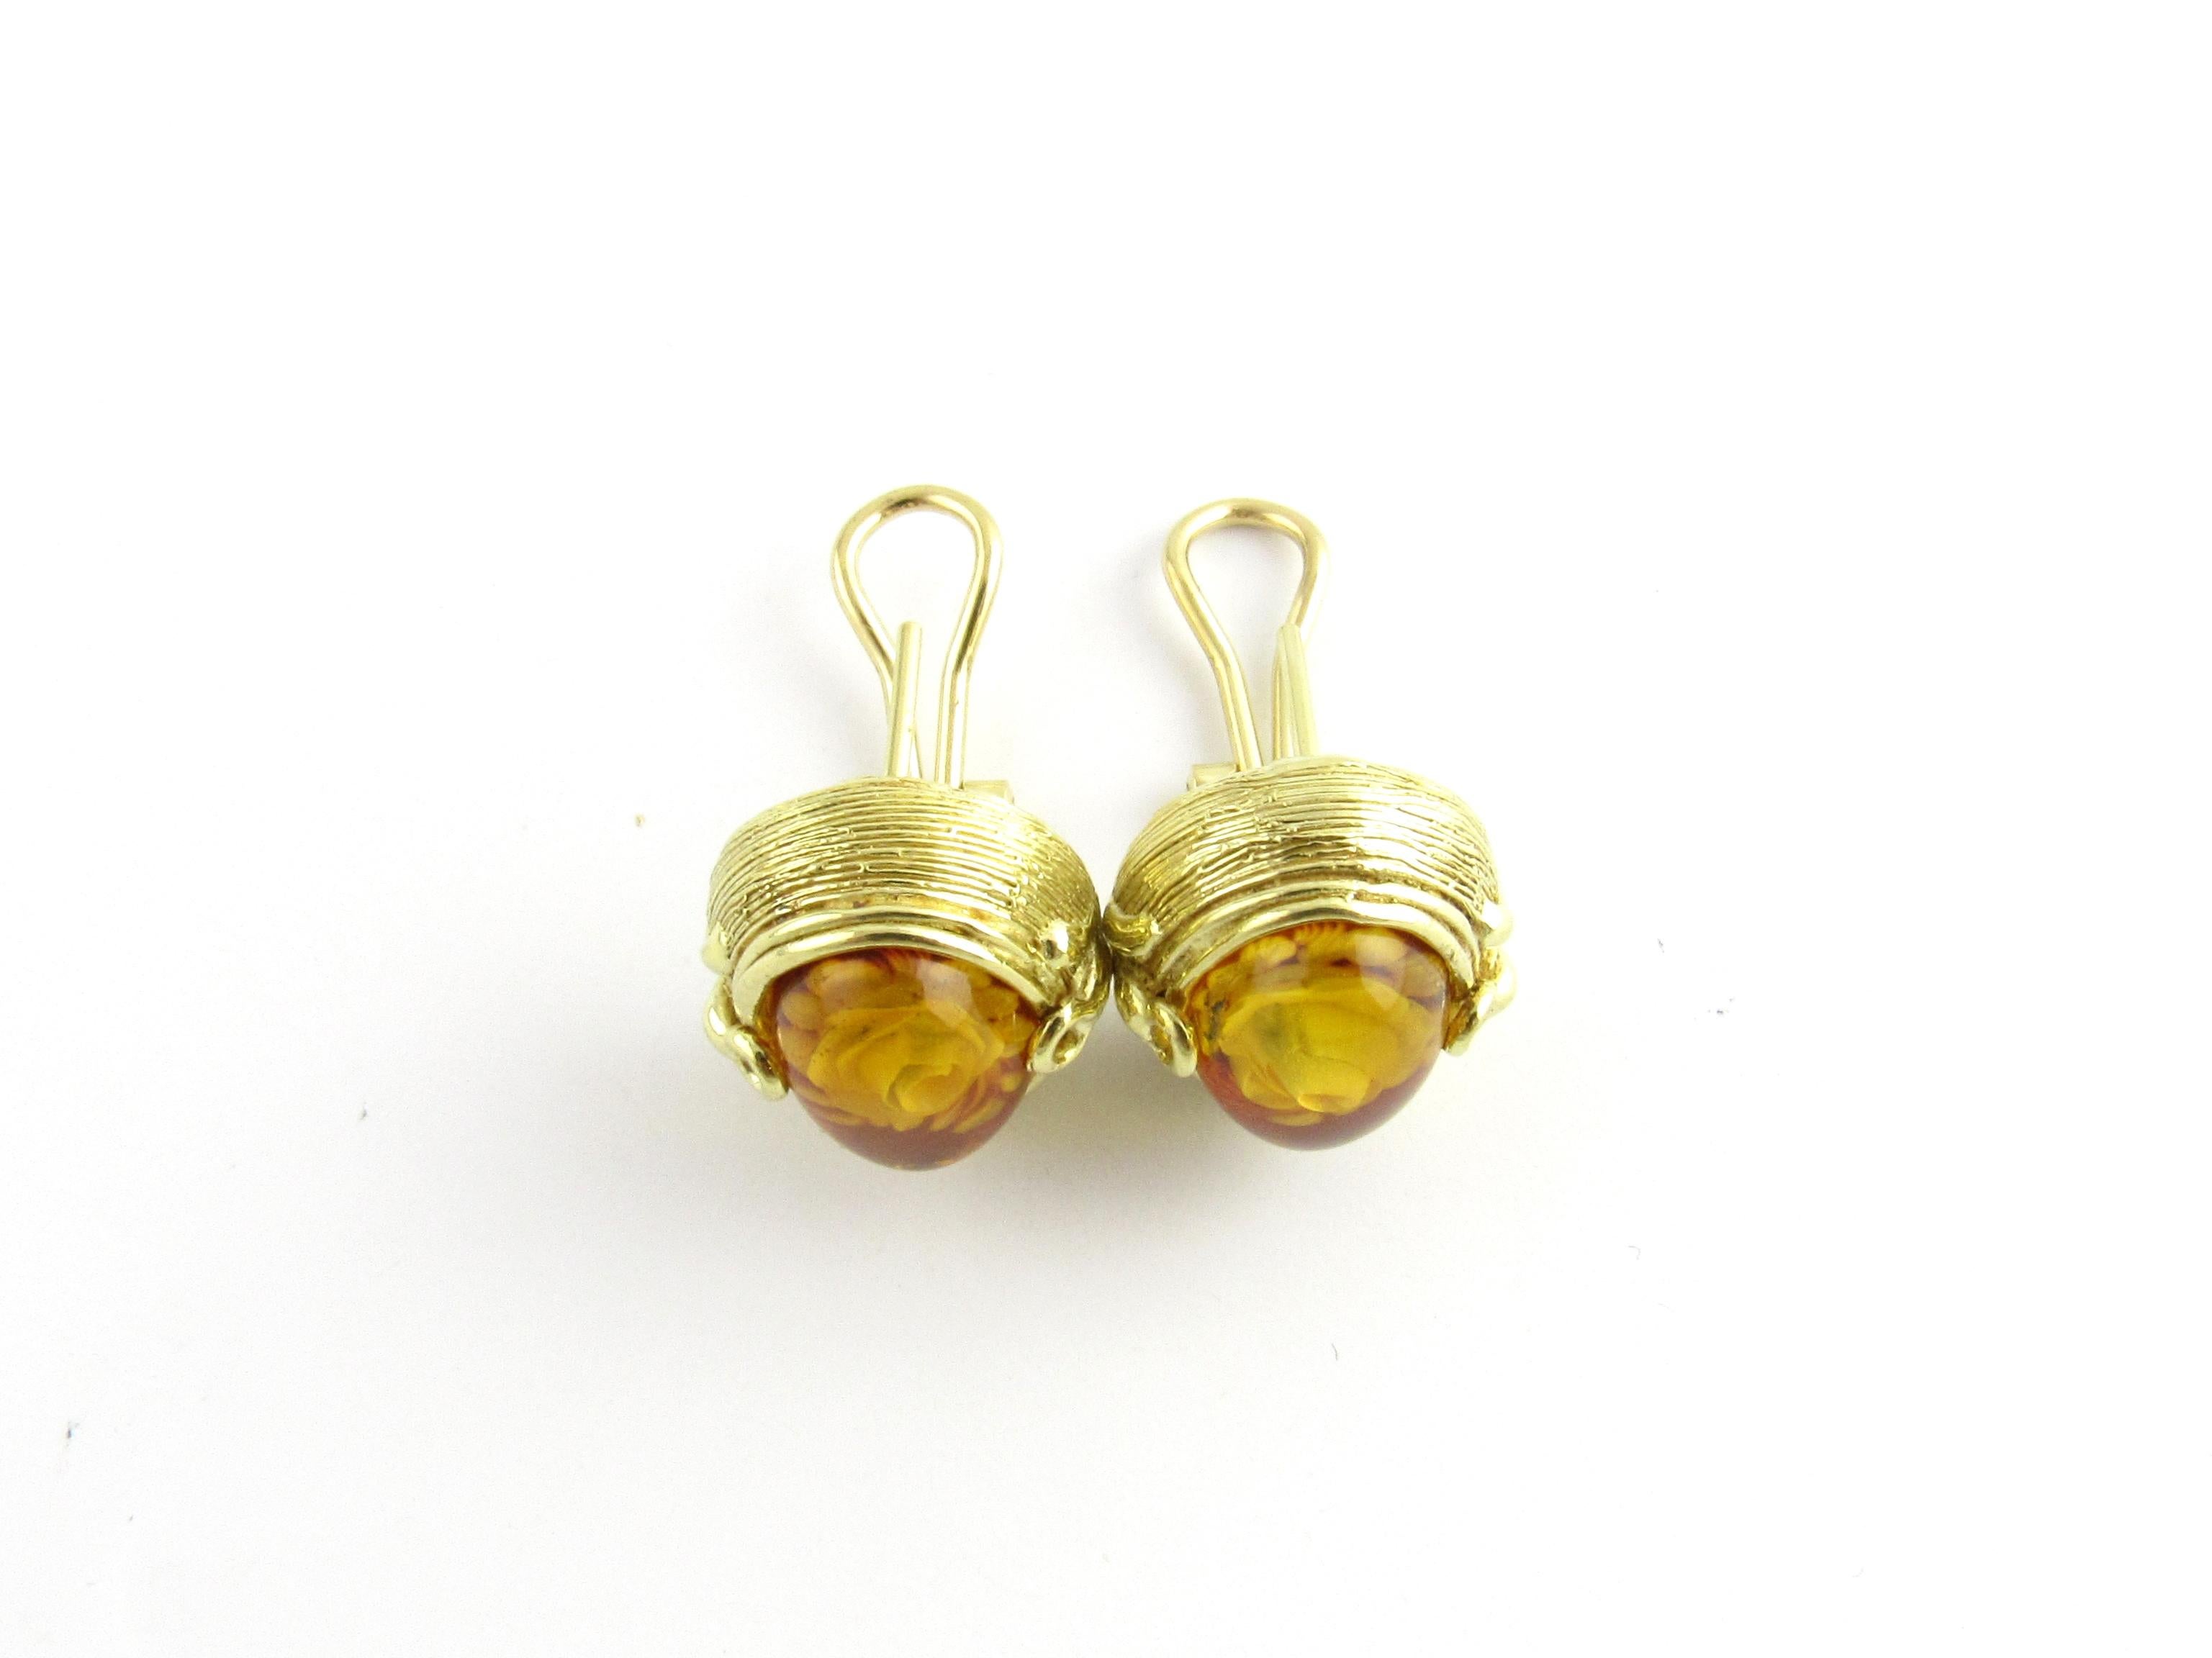 Vintage 18 Karat Yellow Gold and Amber Floral Earrings

These lovely earrings each features one amber stone with a delicate pressed flower inside. Set in beautifully detailed 18K yellow gold. Hinged closures.

Size: 17 mm x 15 mm

Weight: 8.1 dwt. /